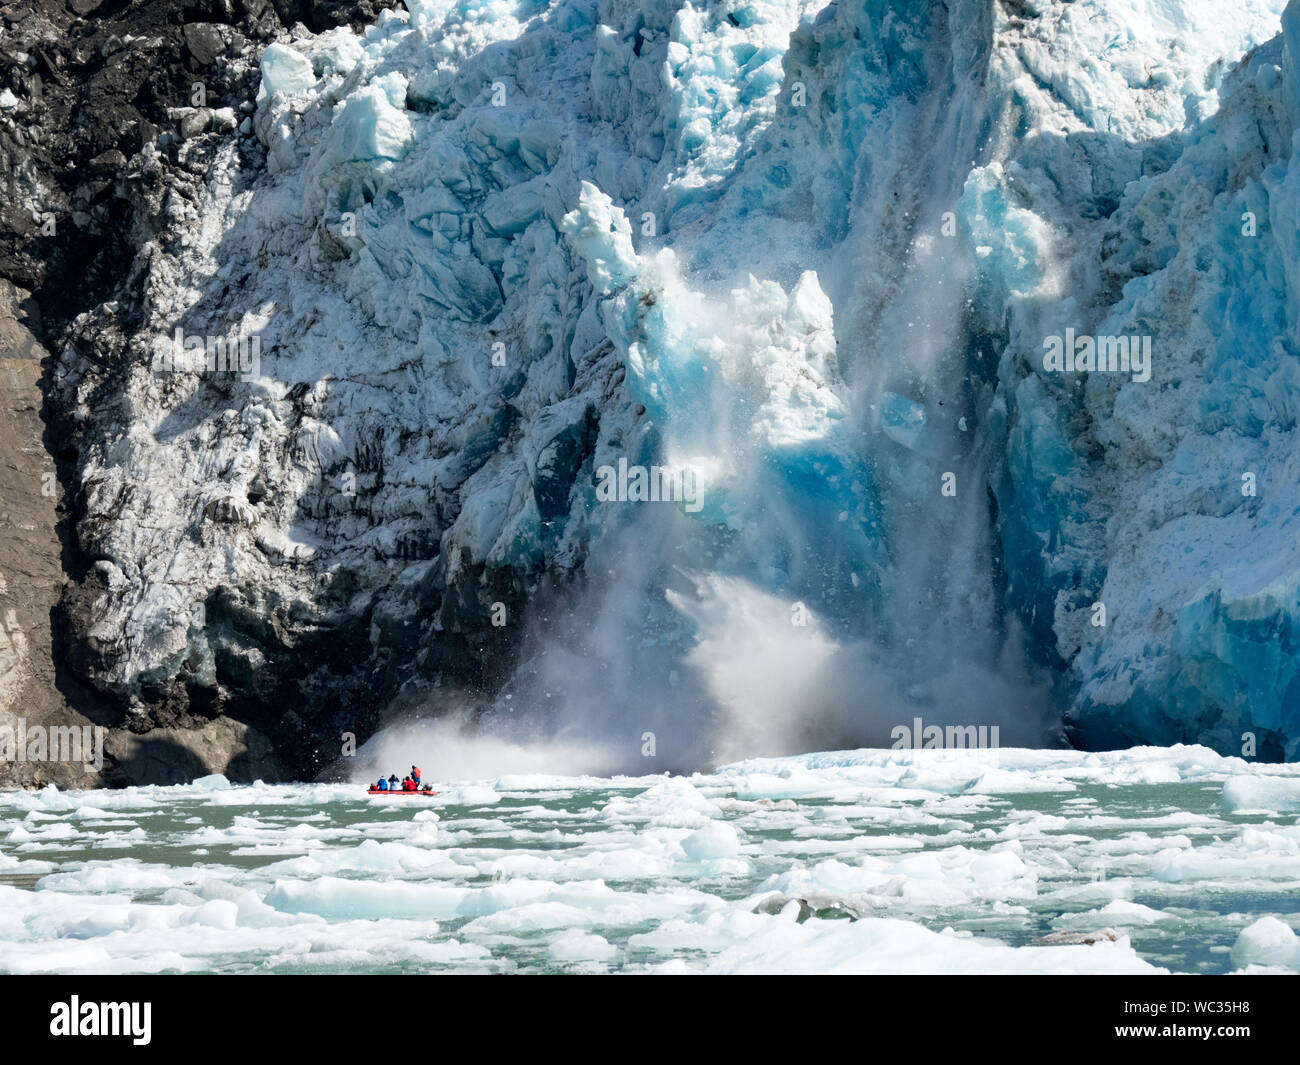 Ecotourists in a small boat watch a massive calving event on the South Sawyer Glacier in Tracy Arm, Southeast Alaska, USA Stock Photo